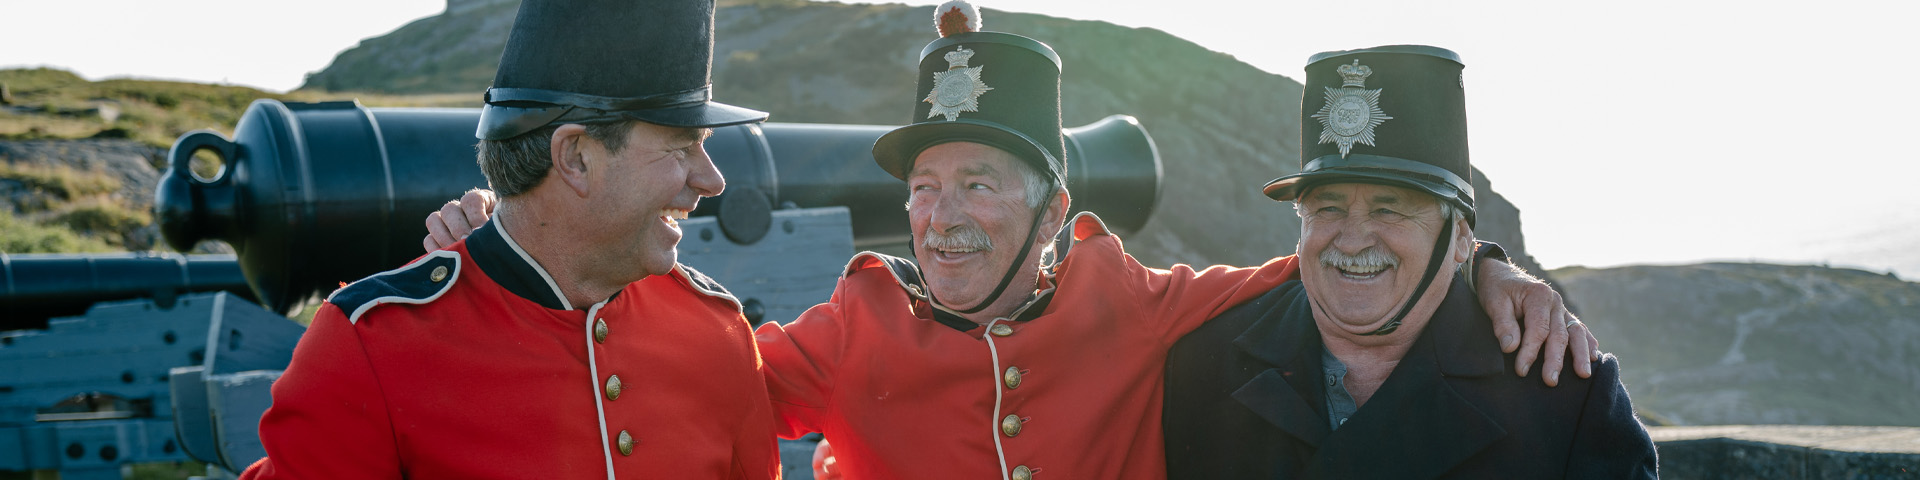 three individuals in historic military costume laughing with their arms around each other